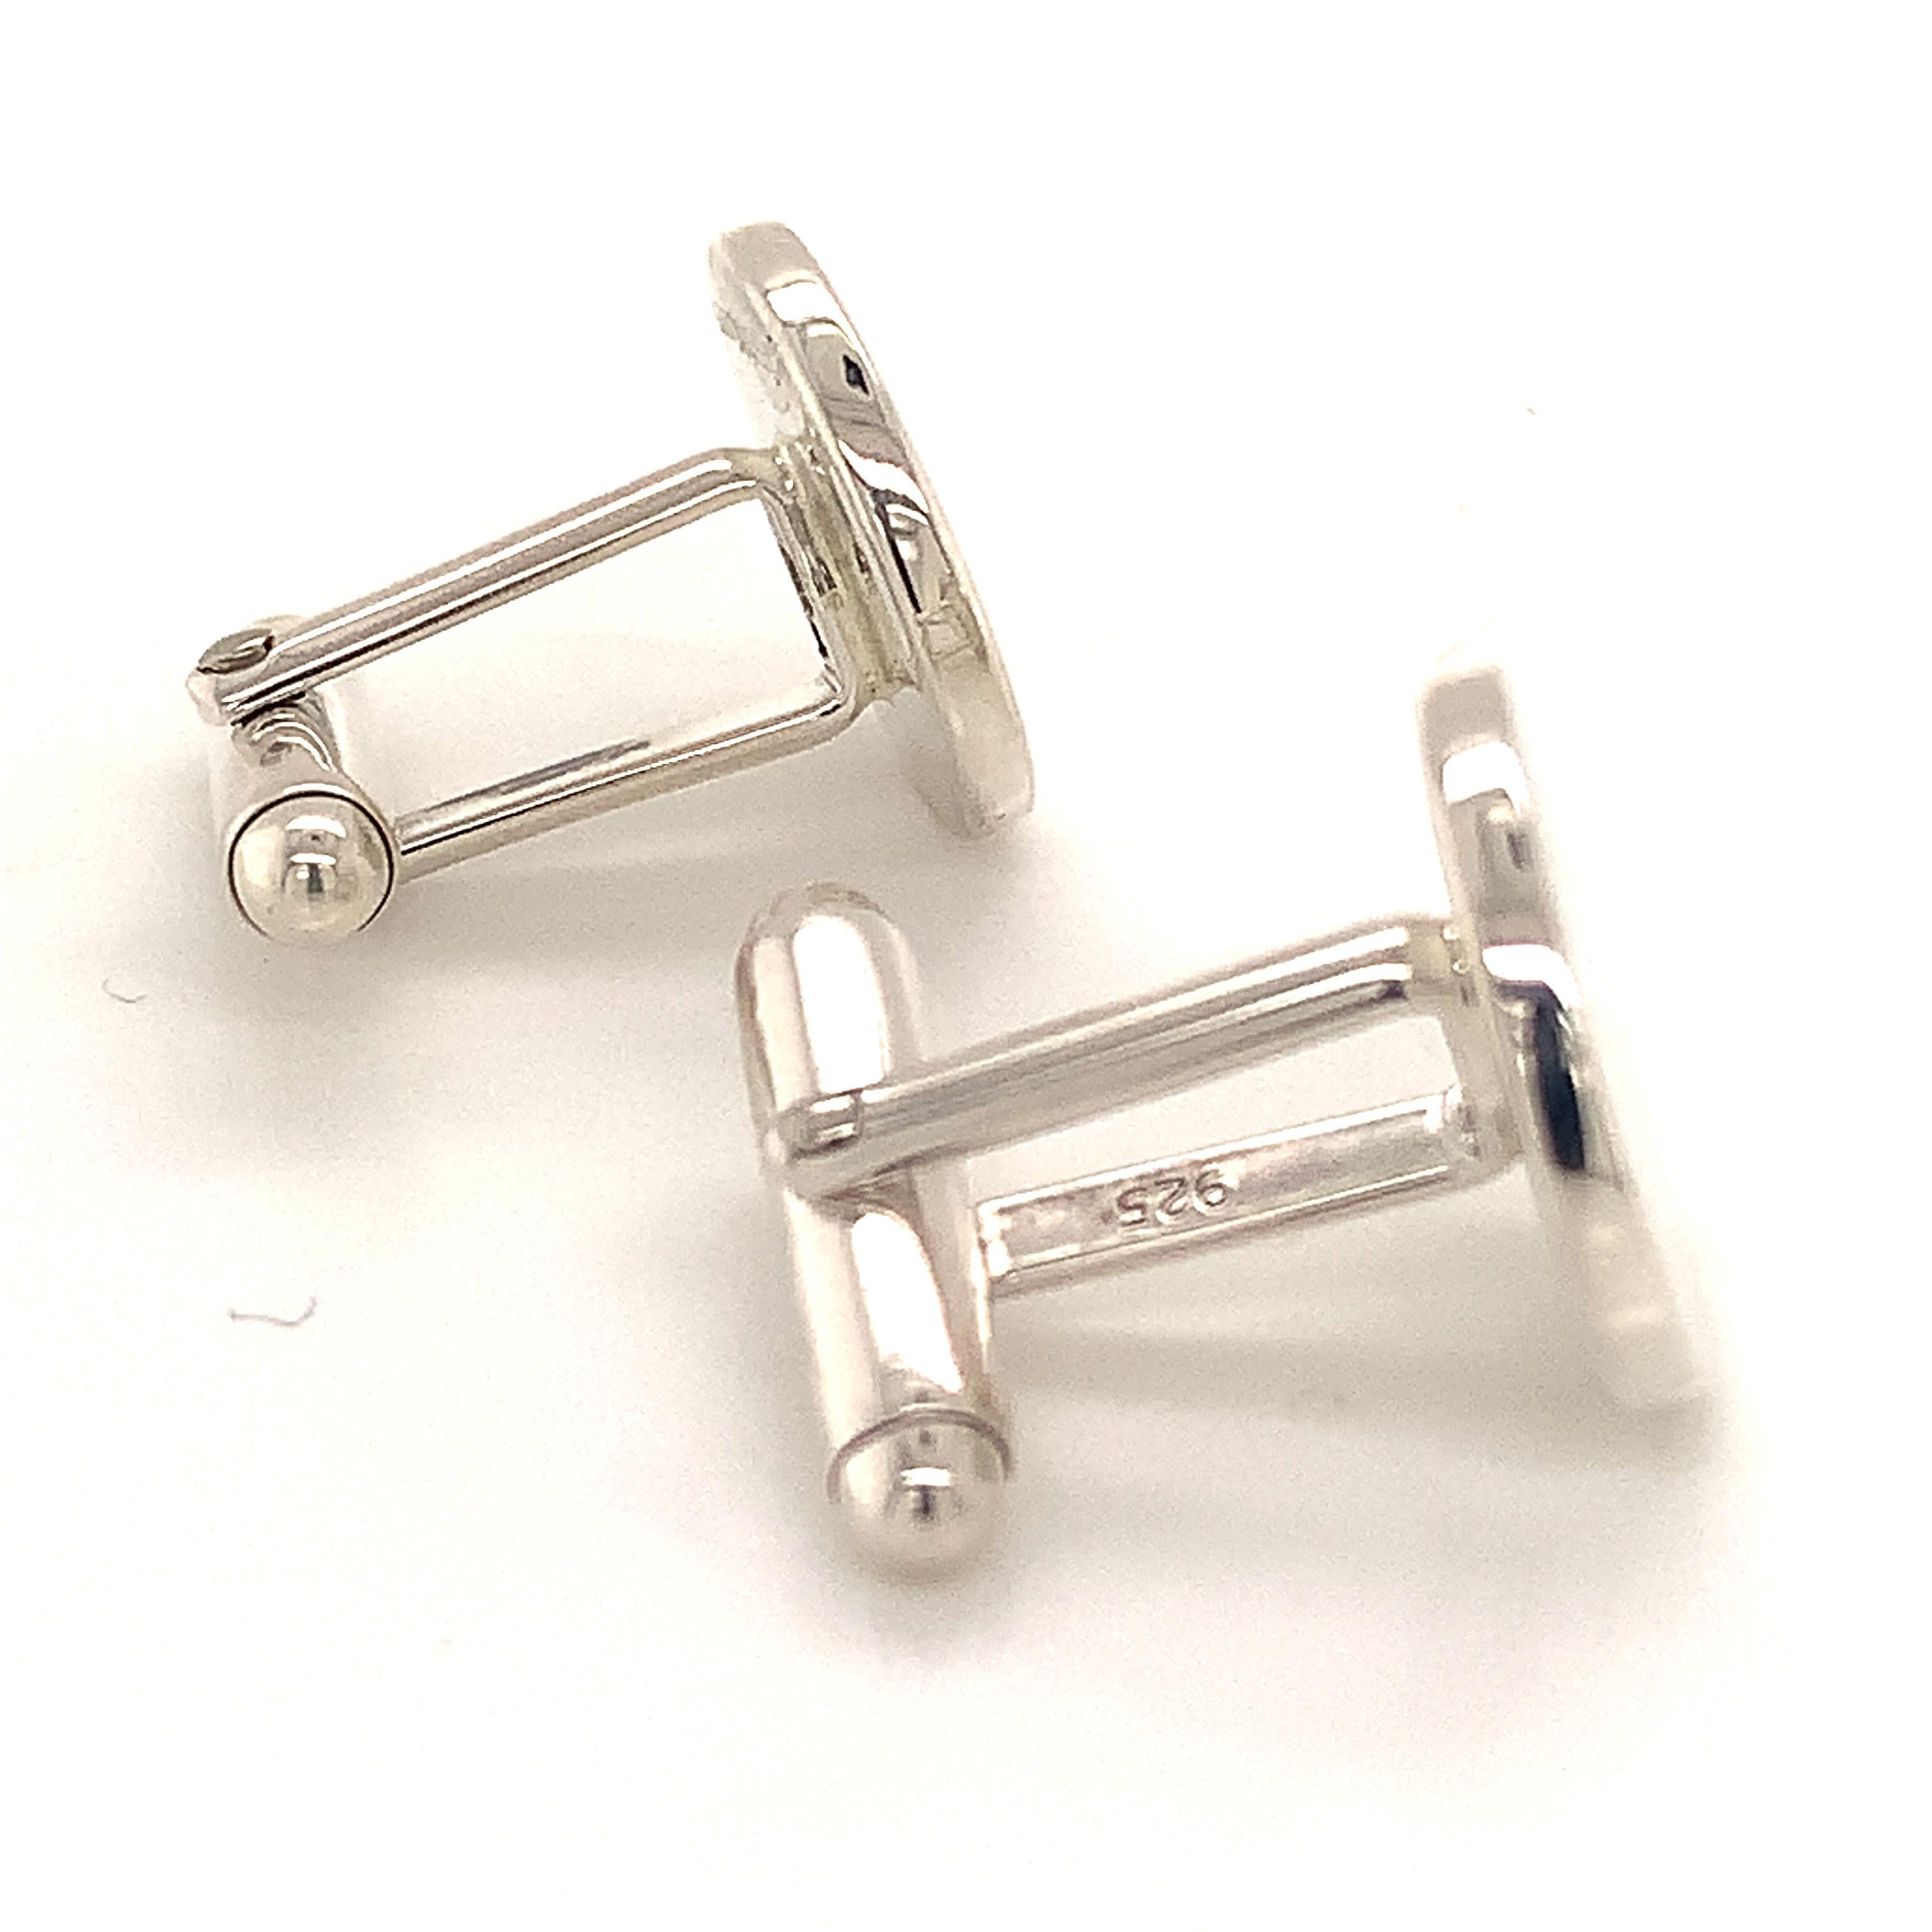 Tiffany & Co Estate Cufflinks Sterling Silver 11.2 Grams TIF76
 
These elegant Authentic Tiffany & Co Men's Cufflinks have a weight of 11.2 Grams.

TRUSTED SELLER SINCE 2002
 
PLEASE SEE OUR HUNDREDS OF POSITIVE FEEDBACKS FROM OUR CLIENTS!!
 
FREE